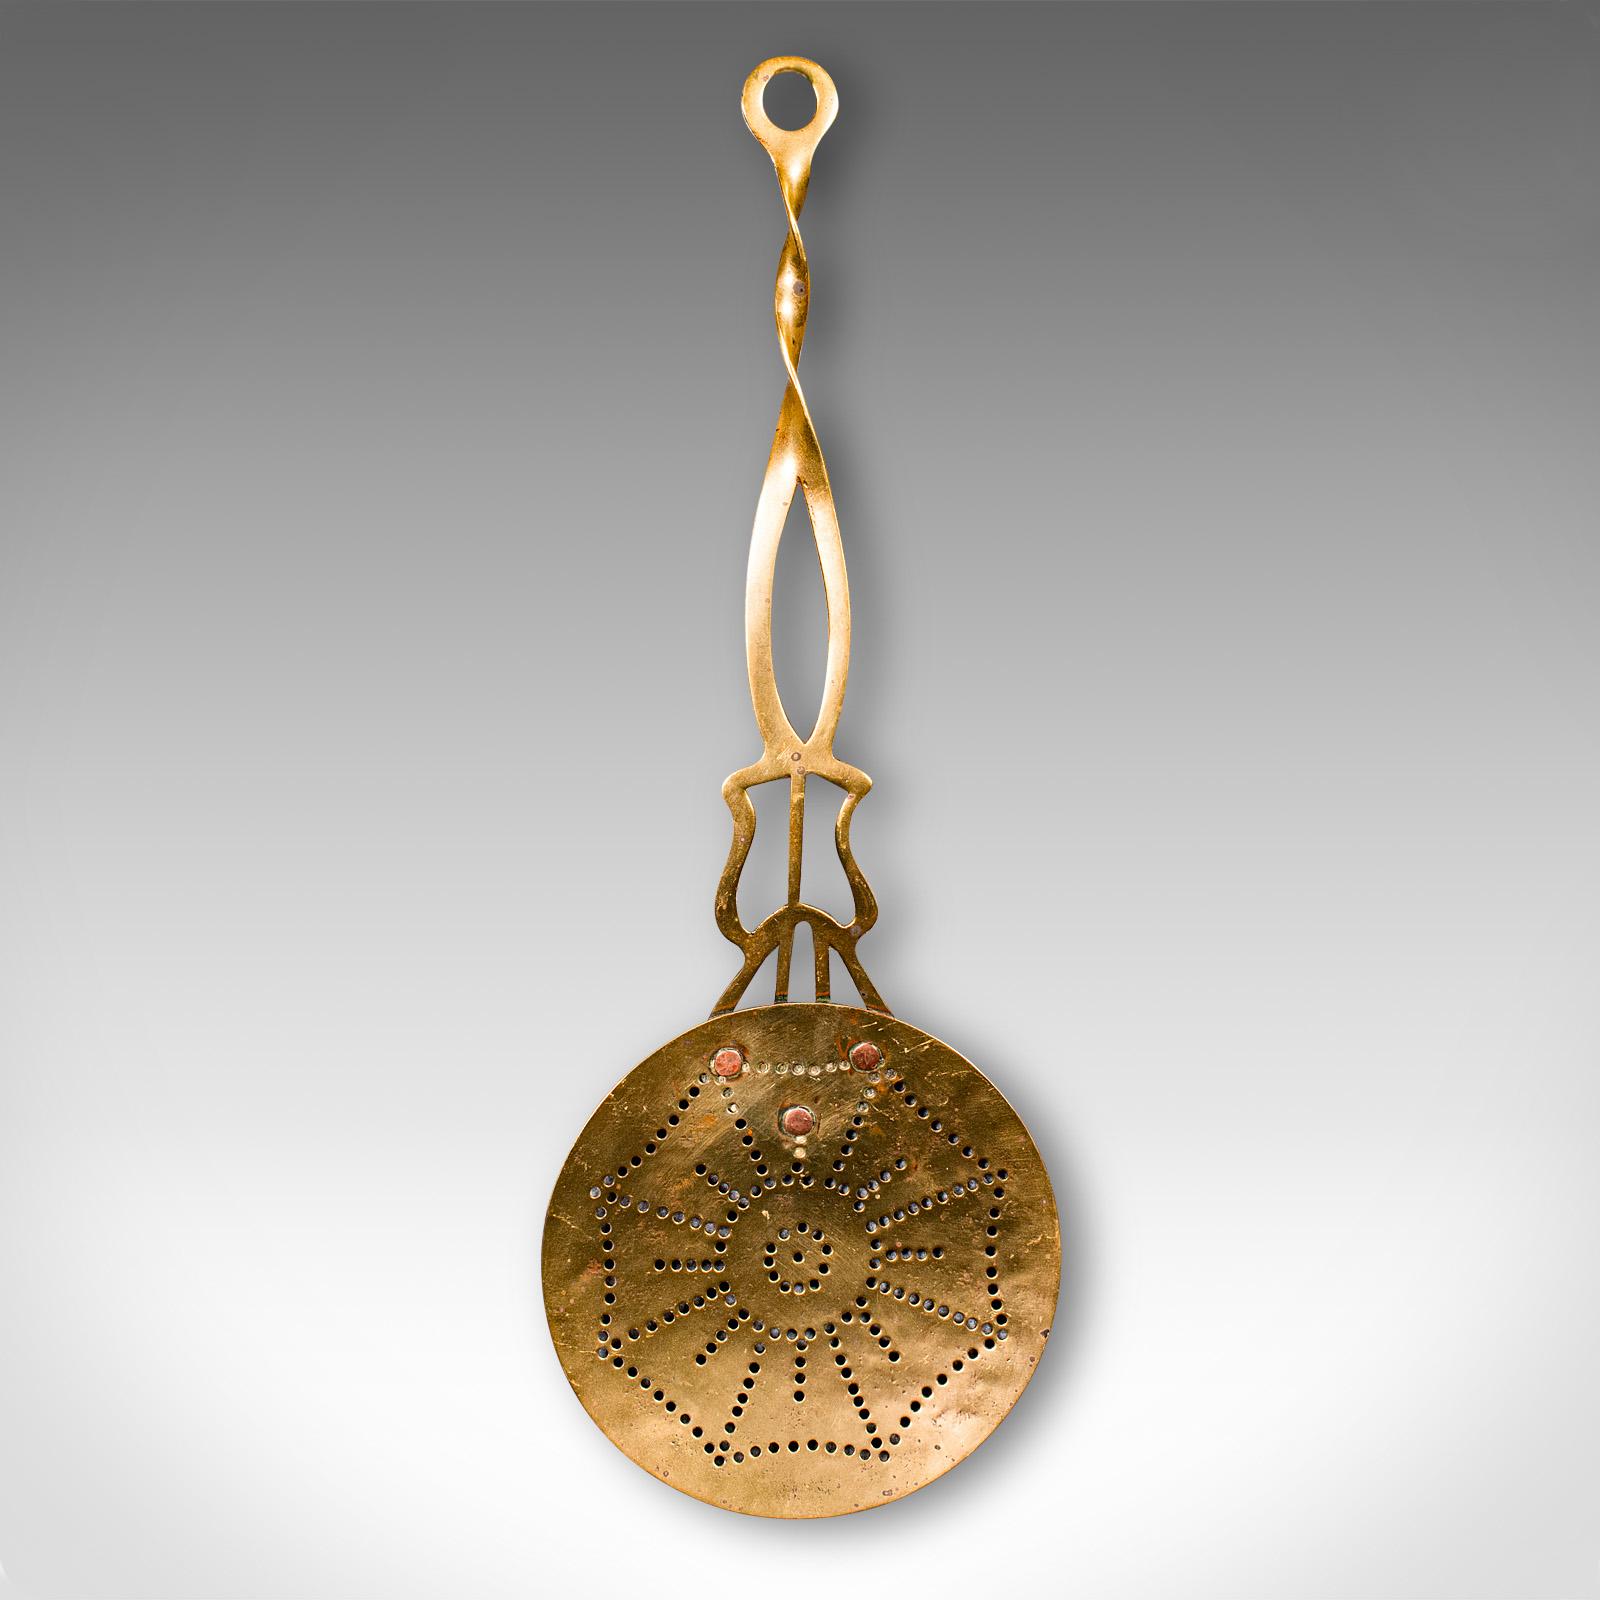 
This is an antique West Country Cream Skimmer. An English, pierced brass milk stirrer, dating to the Georgian period, circa 1800.

Attractive cream skimmer with an appealing decorative finish
Presents a desirable aged patina and in good order
Brass